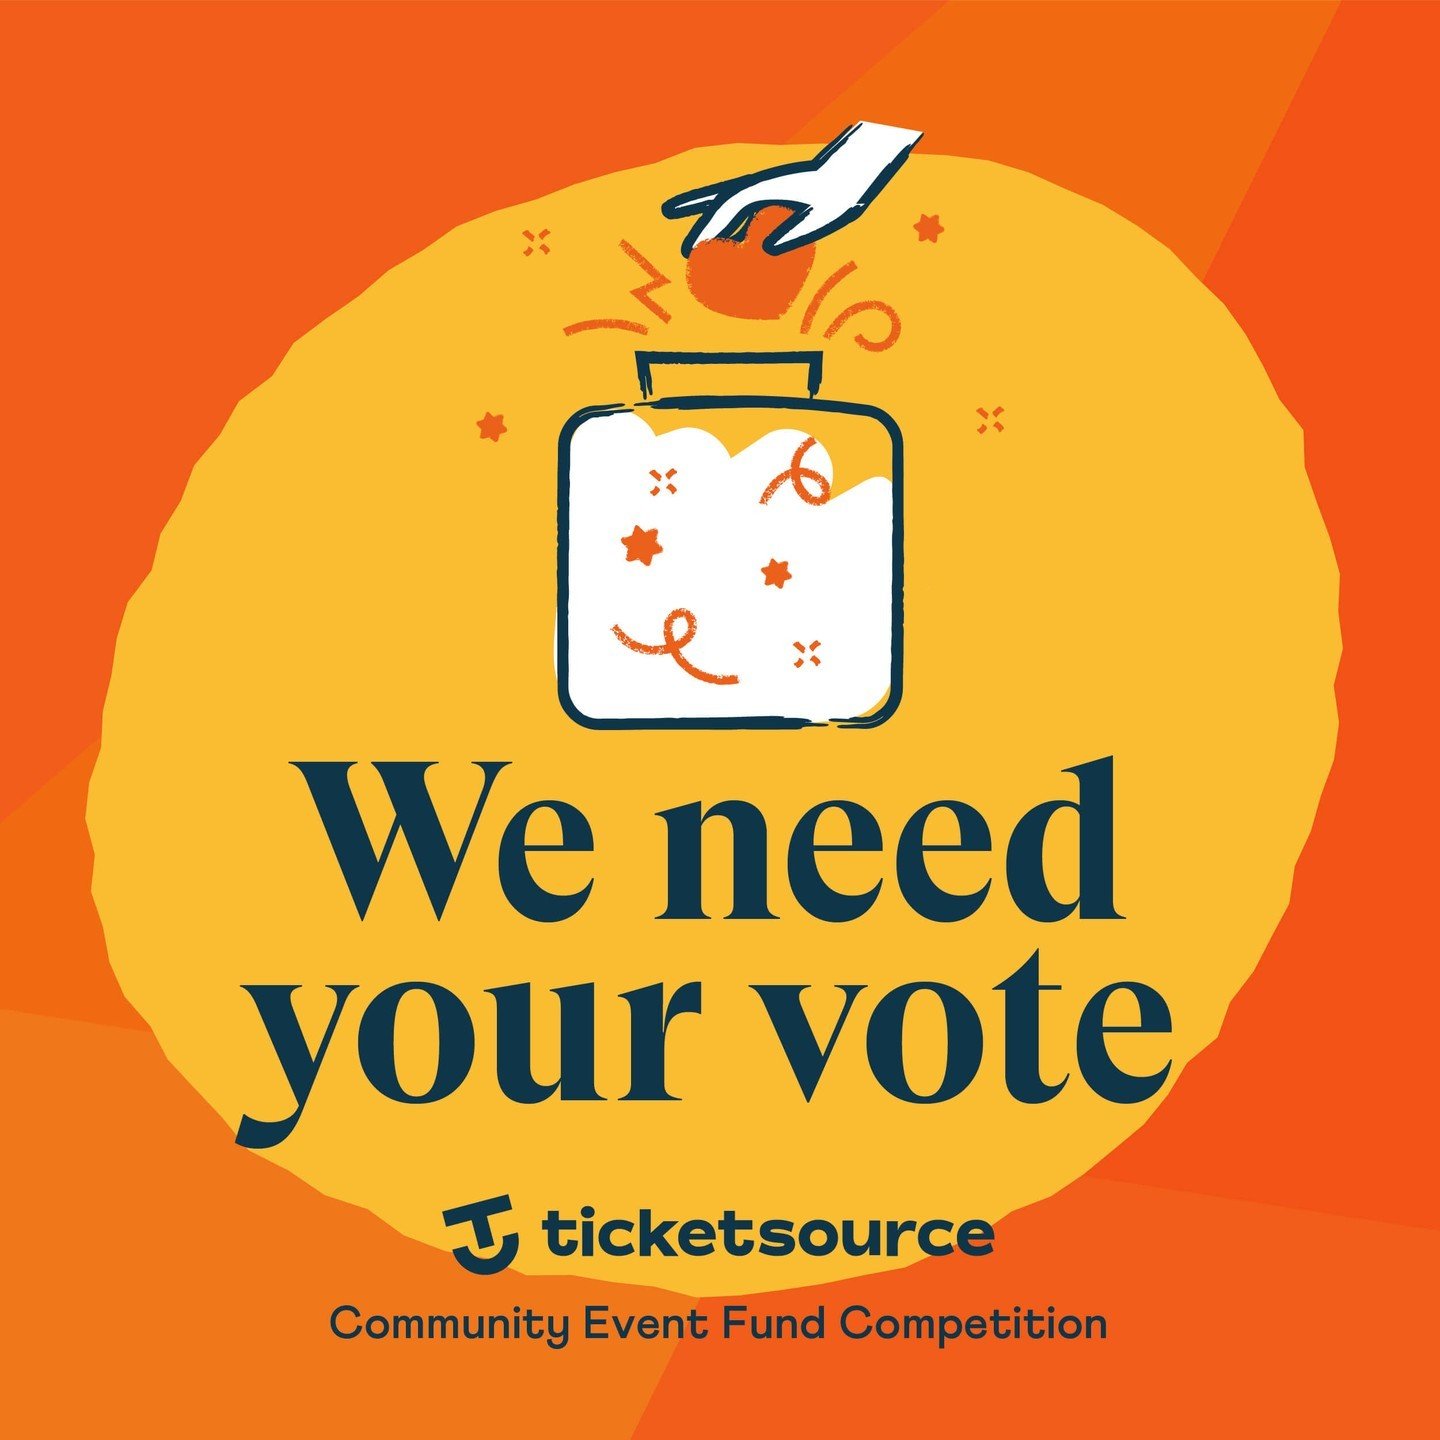 We've got an incredible opportunity to win &pound;1,000 for our next community event, but we need your help!

All it takes is a quick click on the link below to leave your vote and help us surge ahead in the TicketSource Community Event Fund Competit